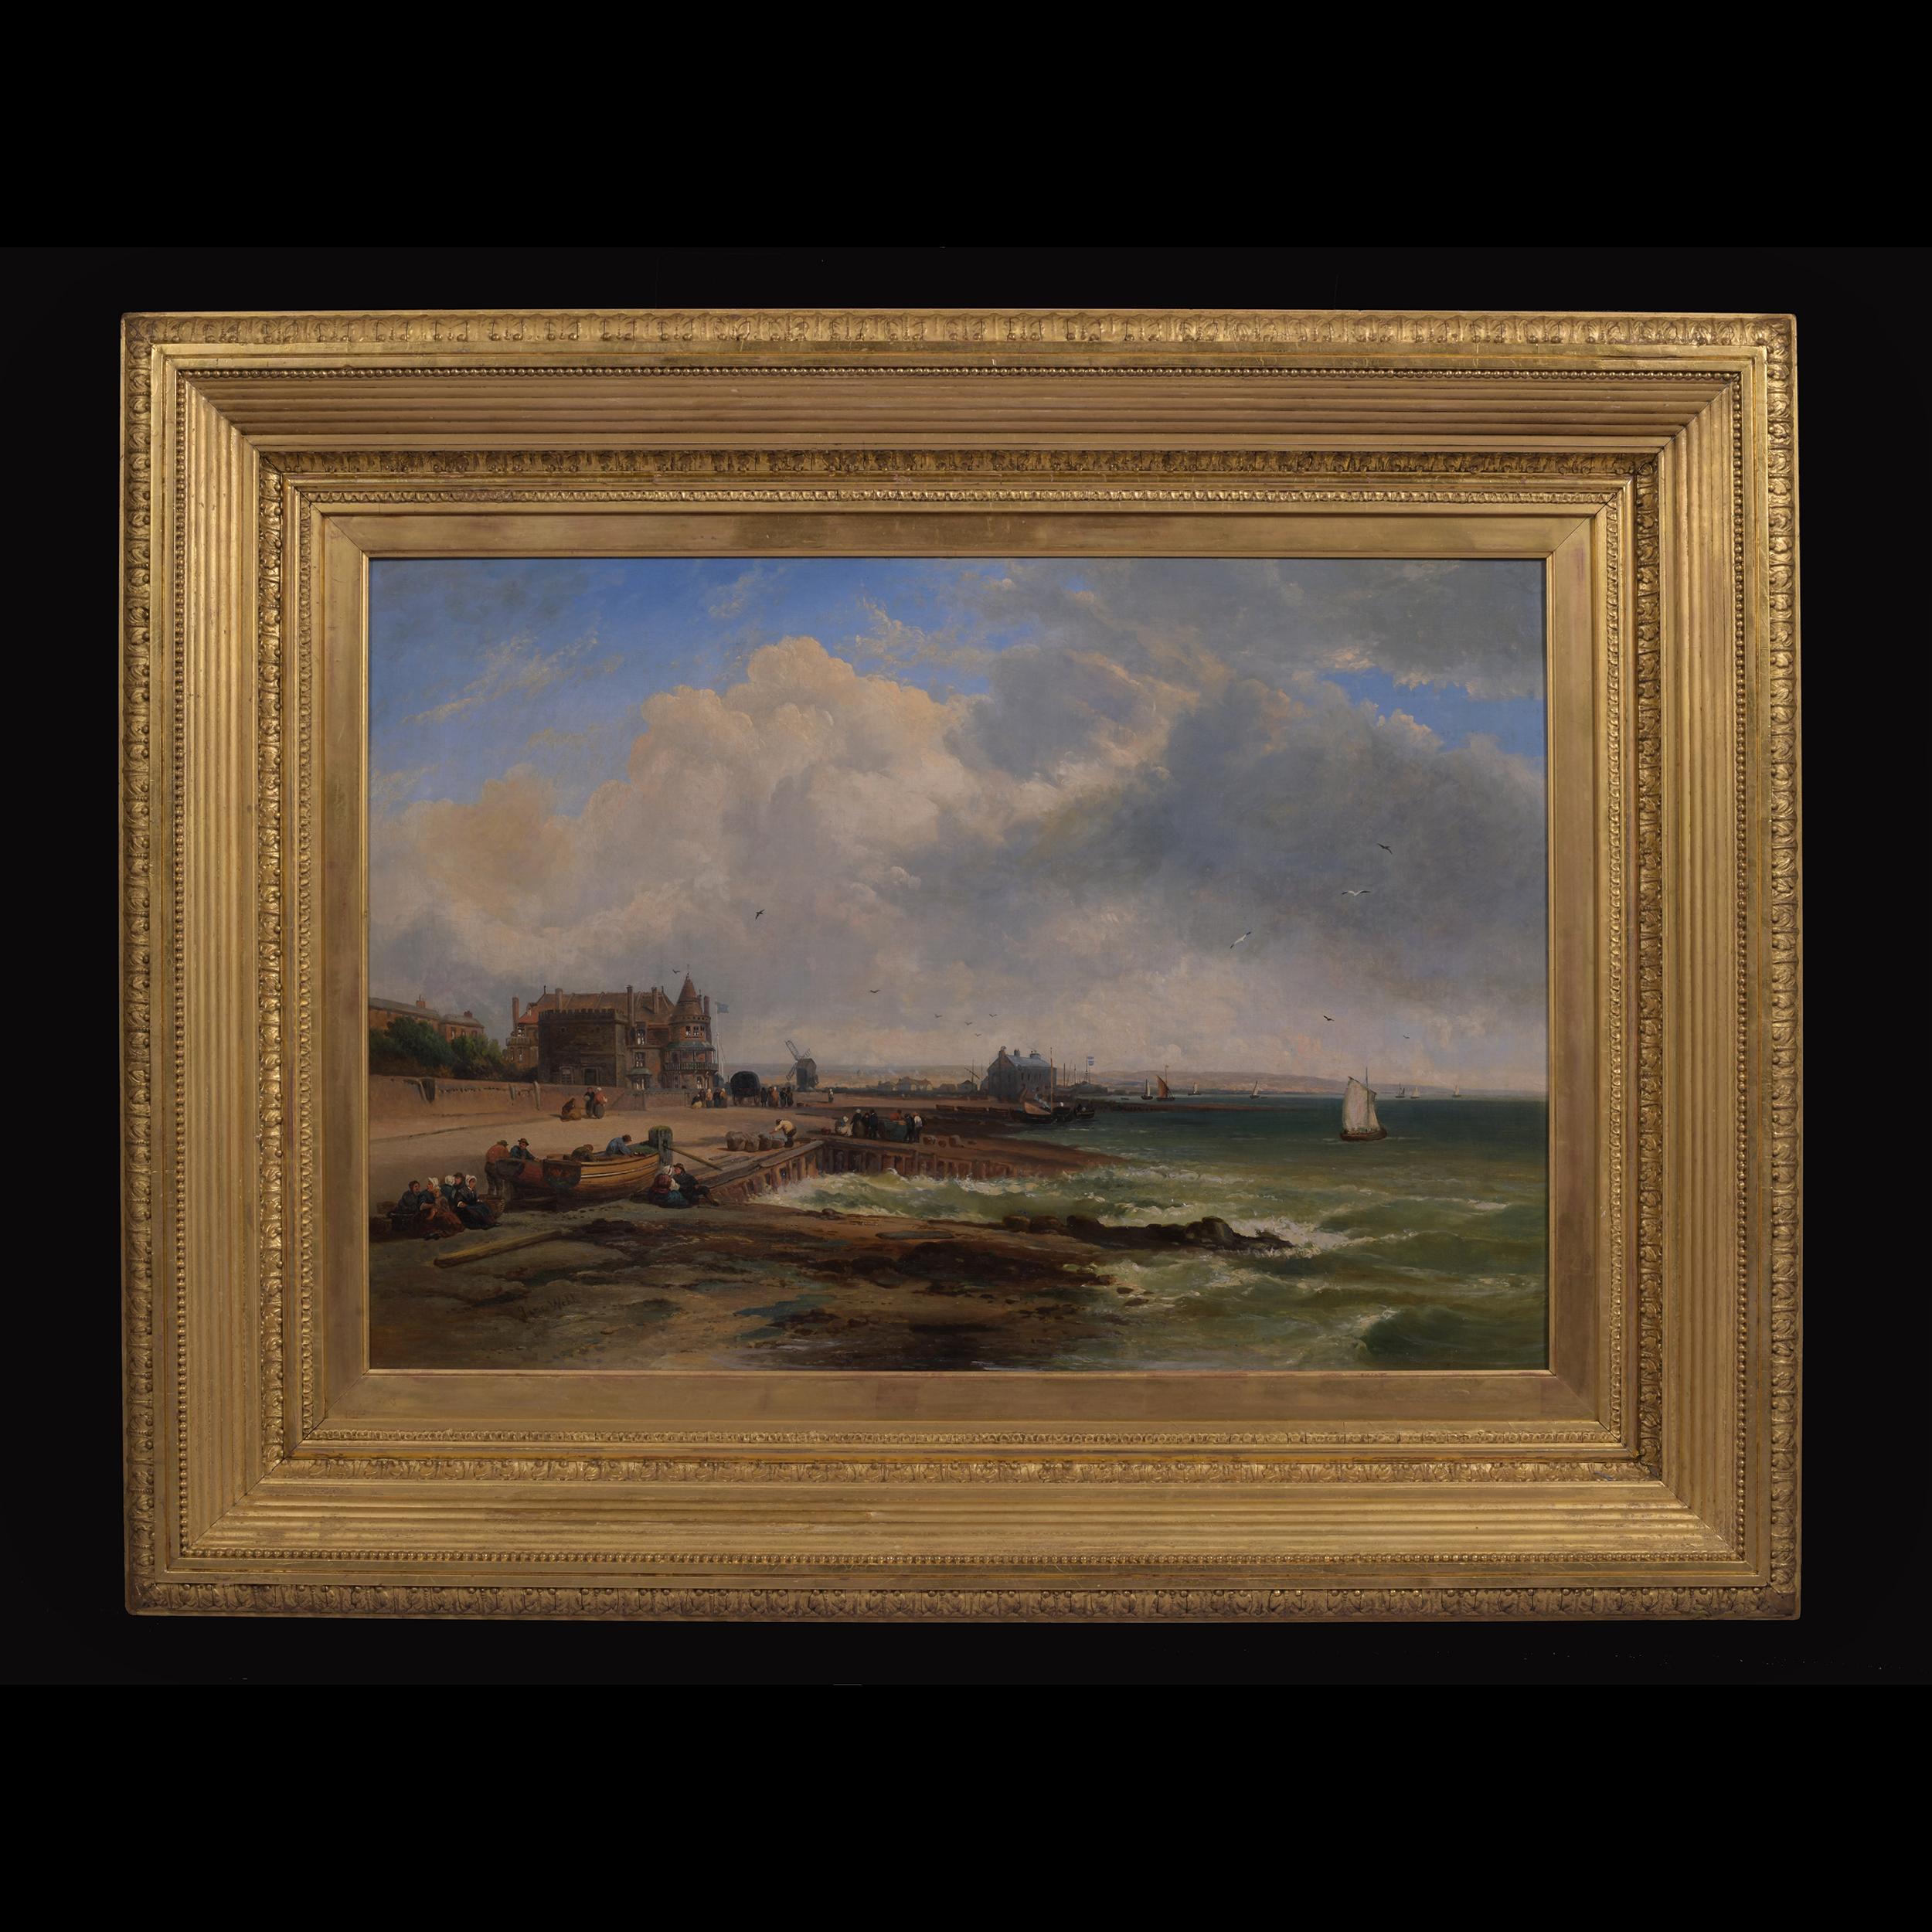 A superb painting of a coastal scene in Deauville, France by the artist James Webb.

Artist: James Webb (British) 1825 - 1895

Medium: Oil on canvas

Signed: James Webb (lower left)

Coastal scene in Deauville, France

In original gilt